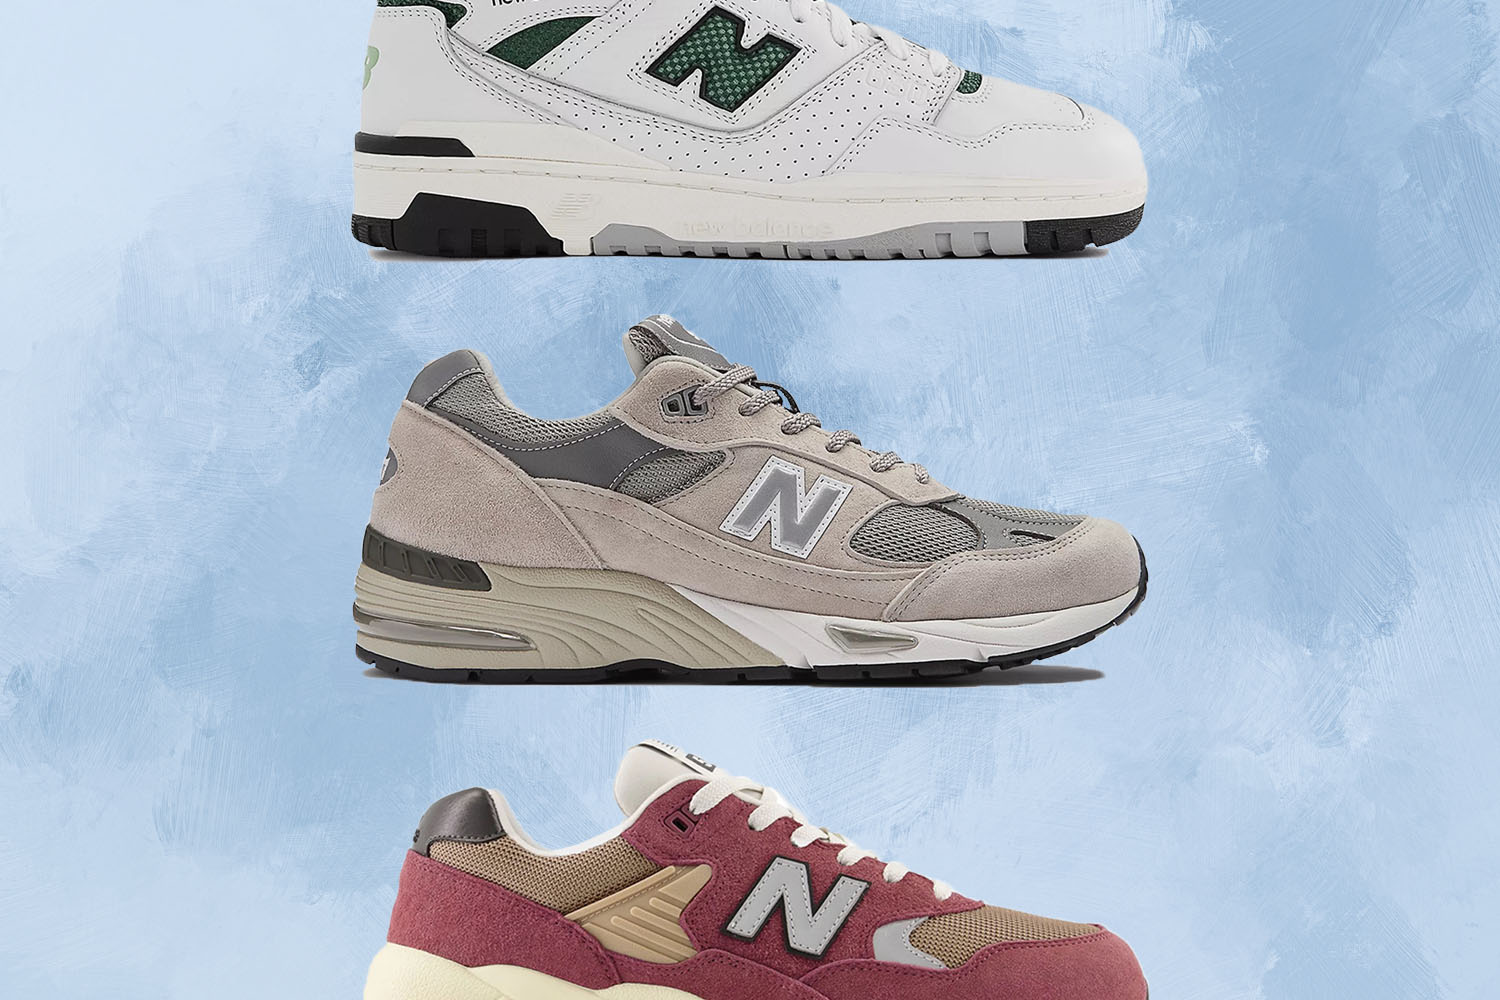 Celebrities Wearing New Balance Sneakers for Comfort & Style, Photos